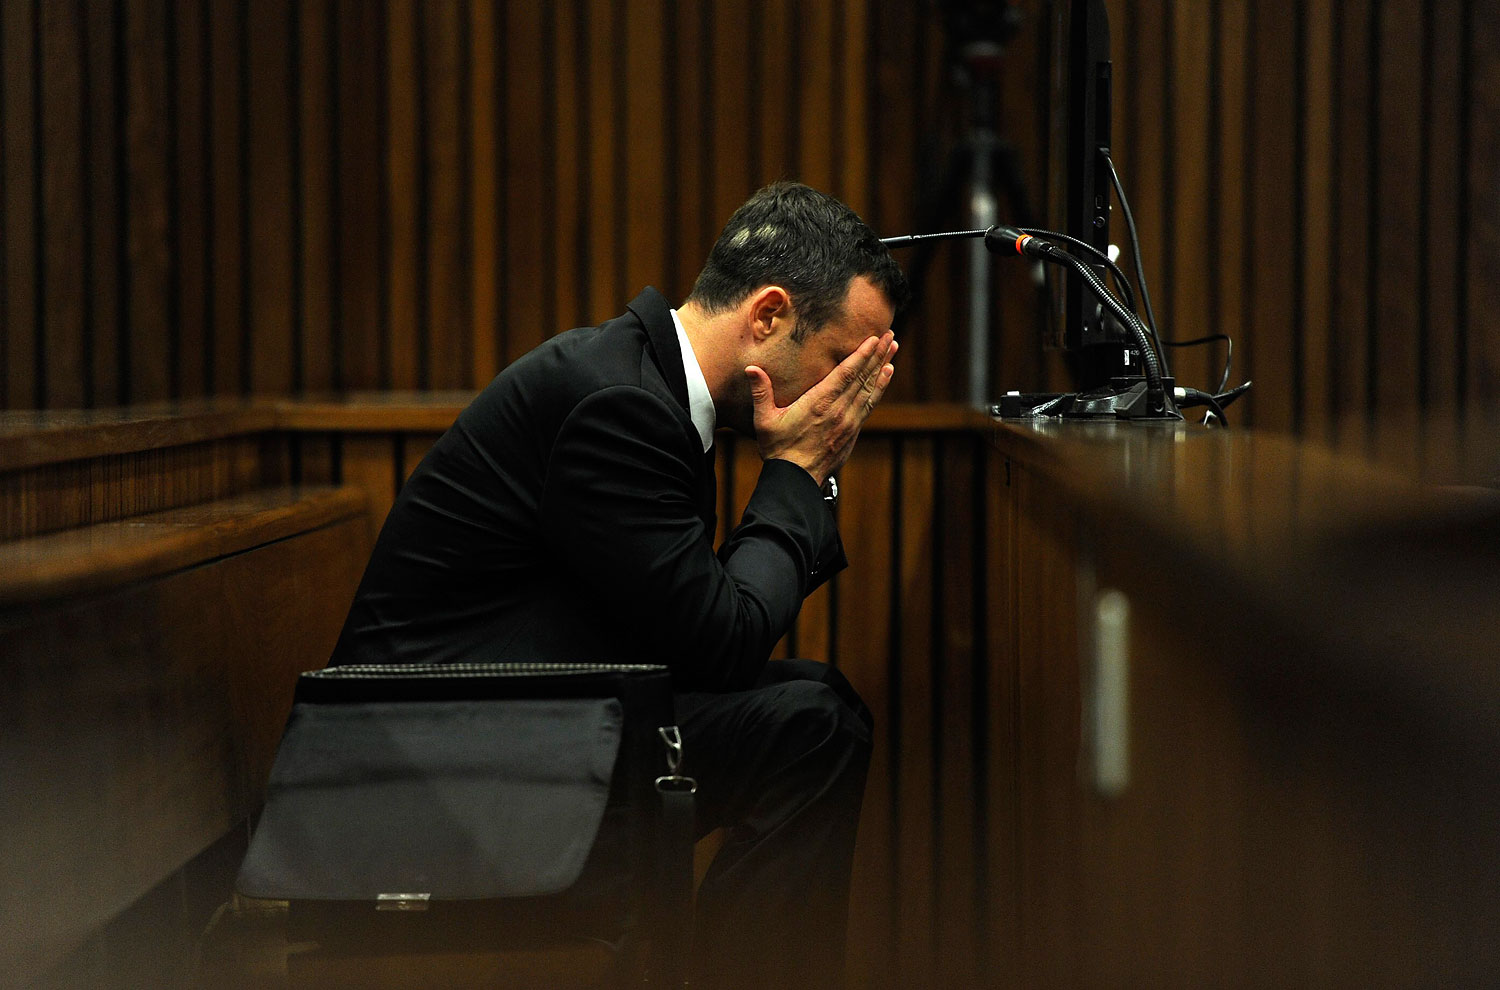 Olympic and Paralympic track star Oscar Pistorius reacts during the fourth day of his trial for the murder of his girlfriend Reeva Steenkamp at the North Gauteng High Court in Pretoria, March 6, 2014.  